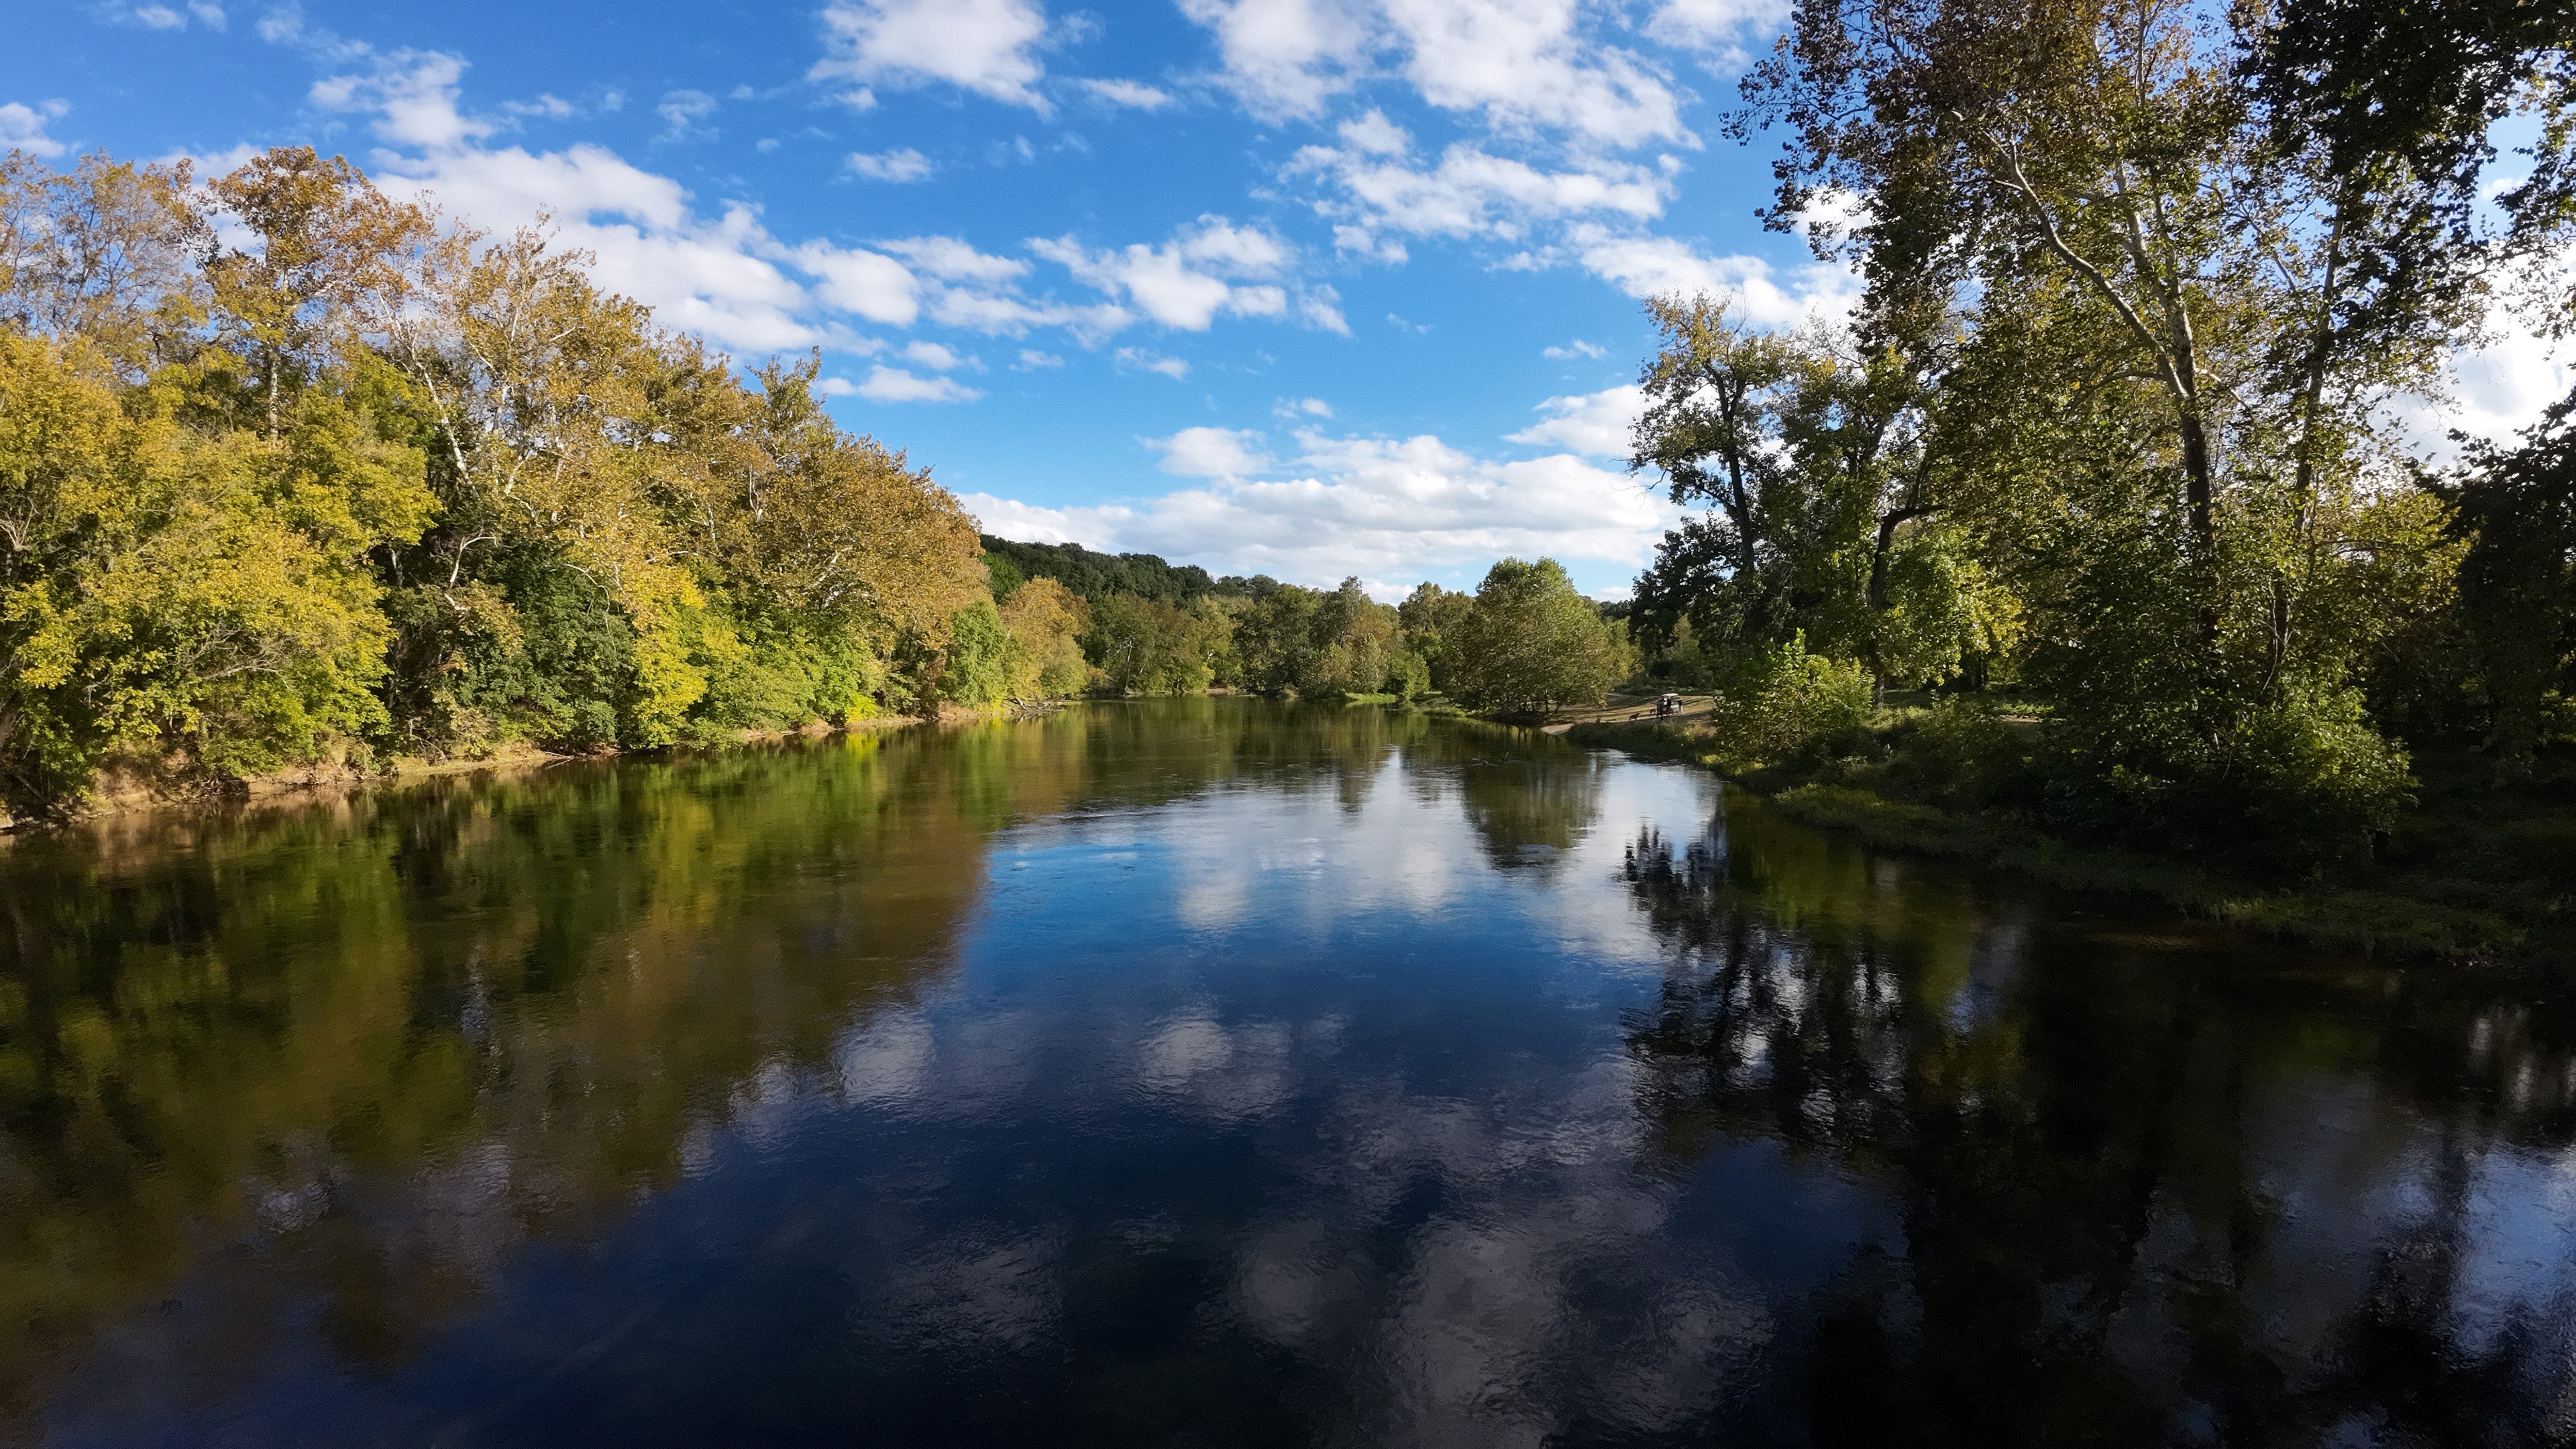 Camper submitted image from Luray RV Resort on Shenandoah River  - 1